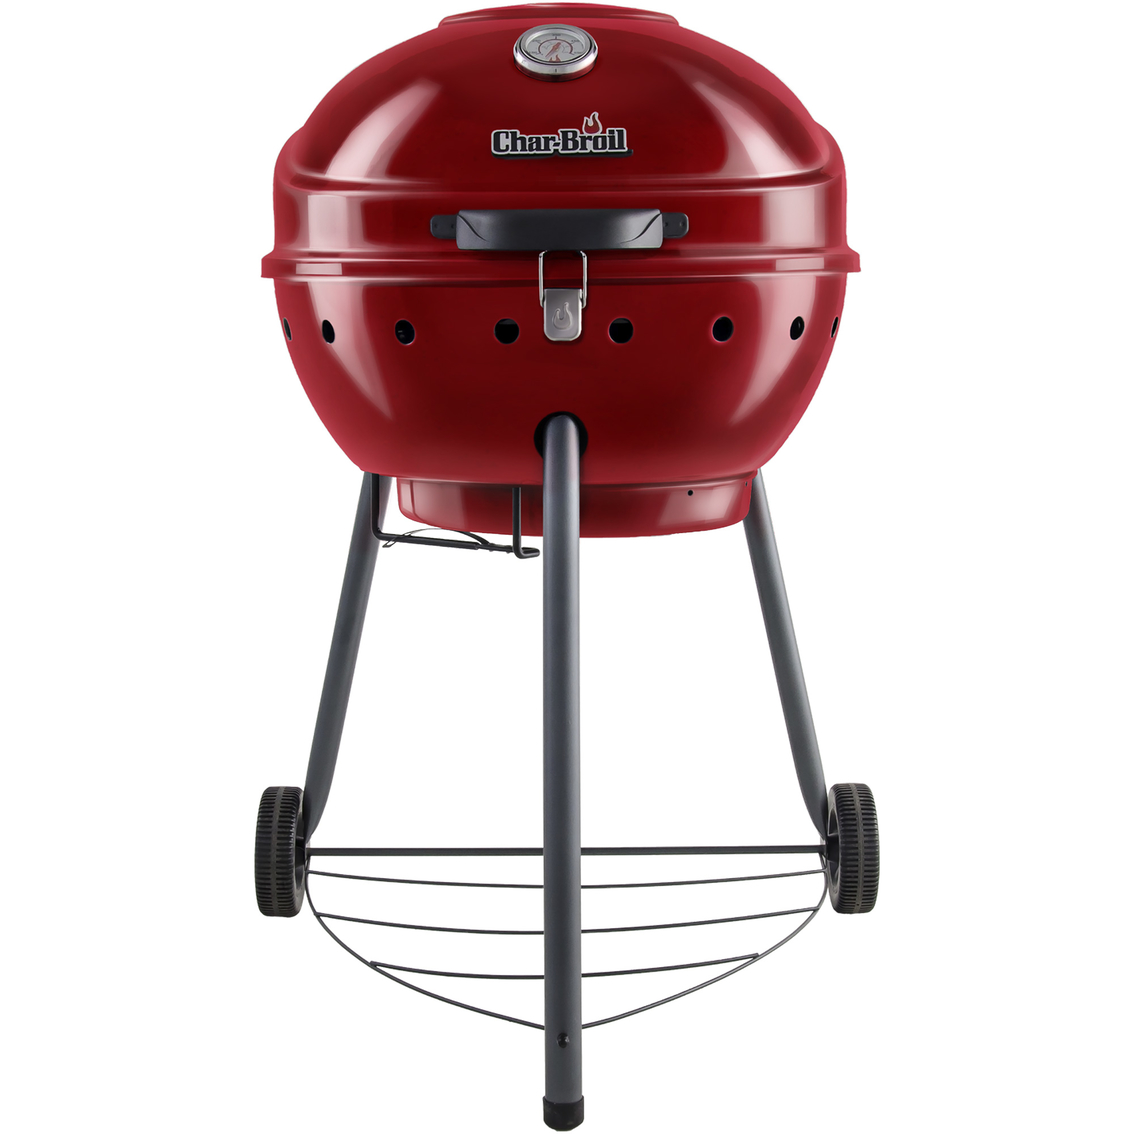 Char-Broil Red Kettleman Charcoal Grill - Image 2 of 5